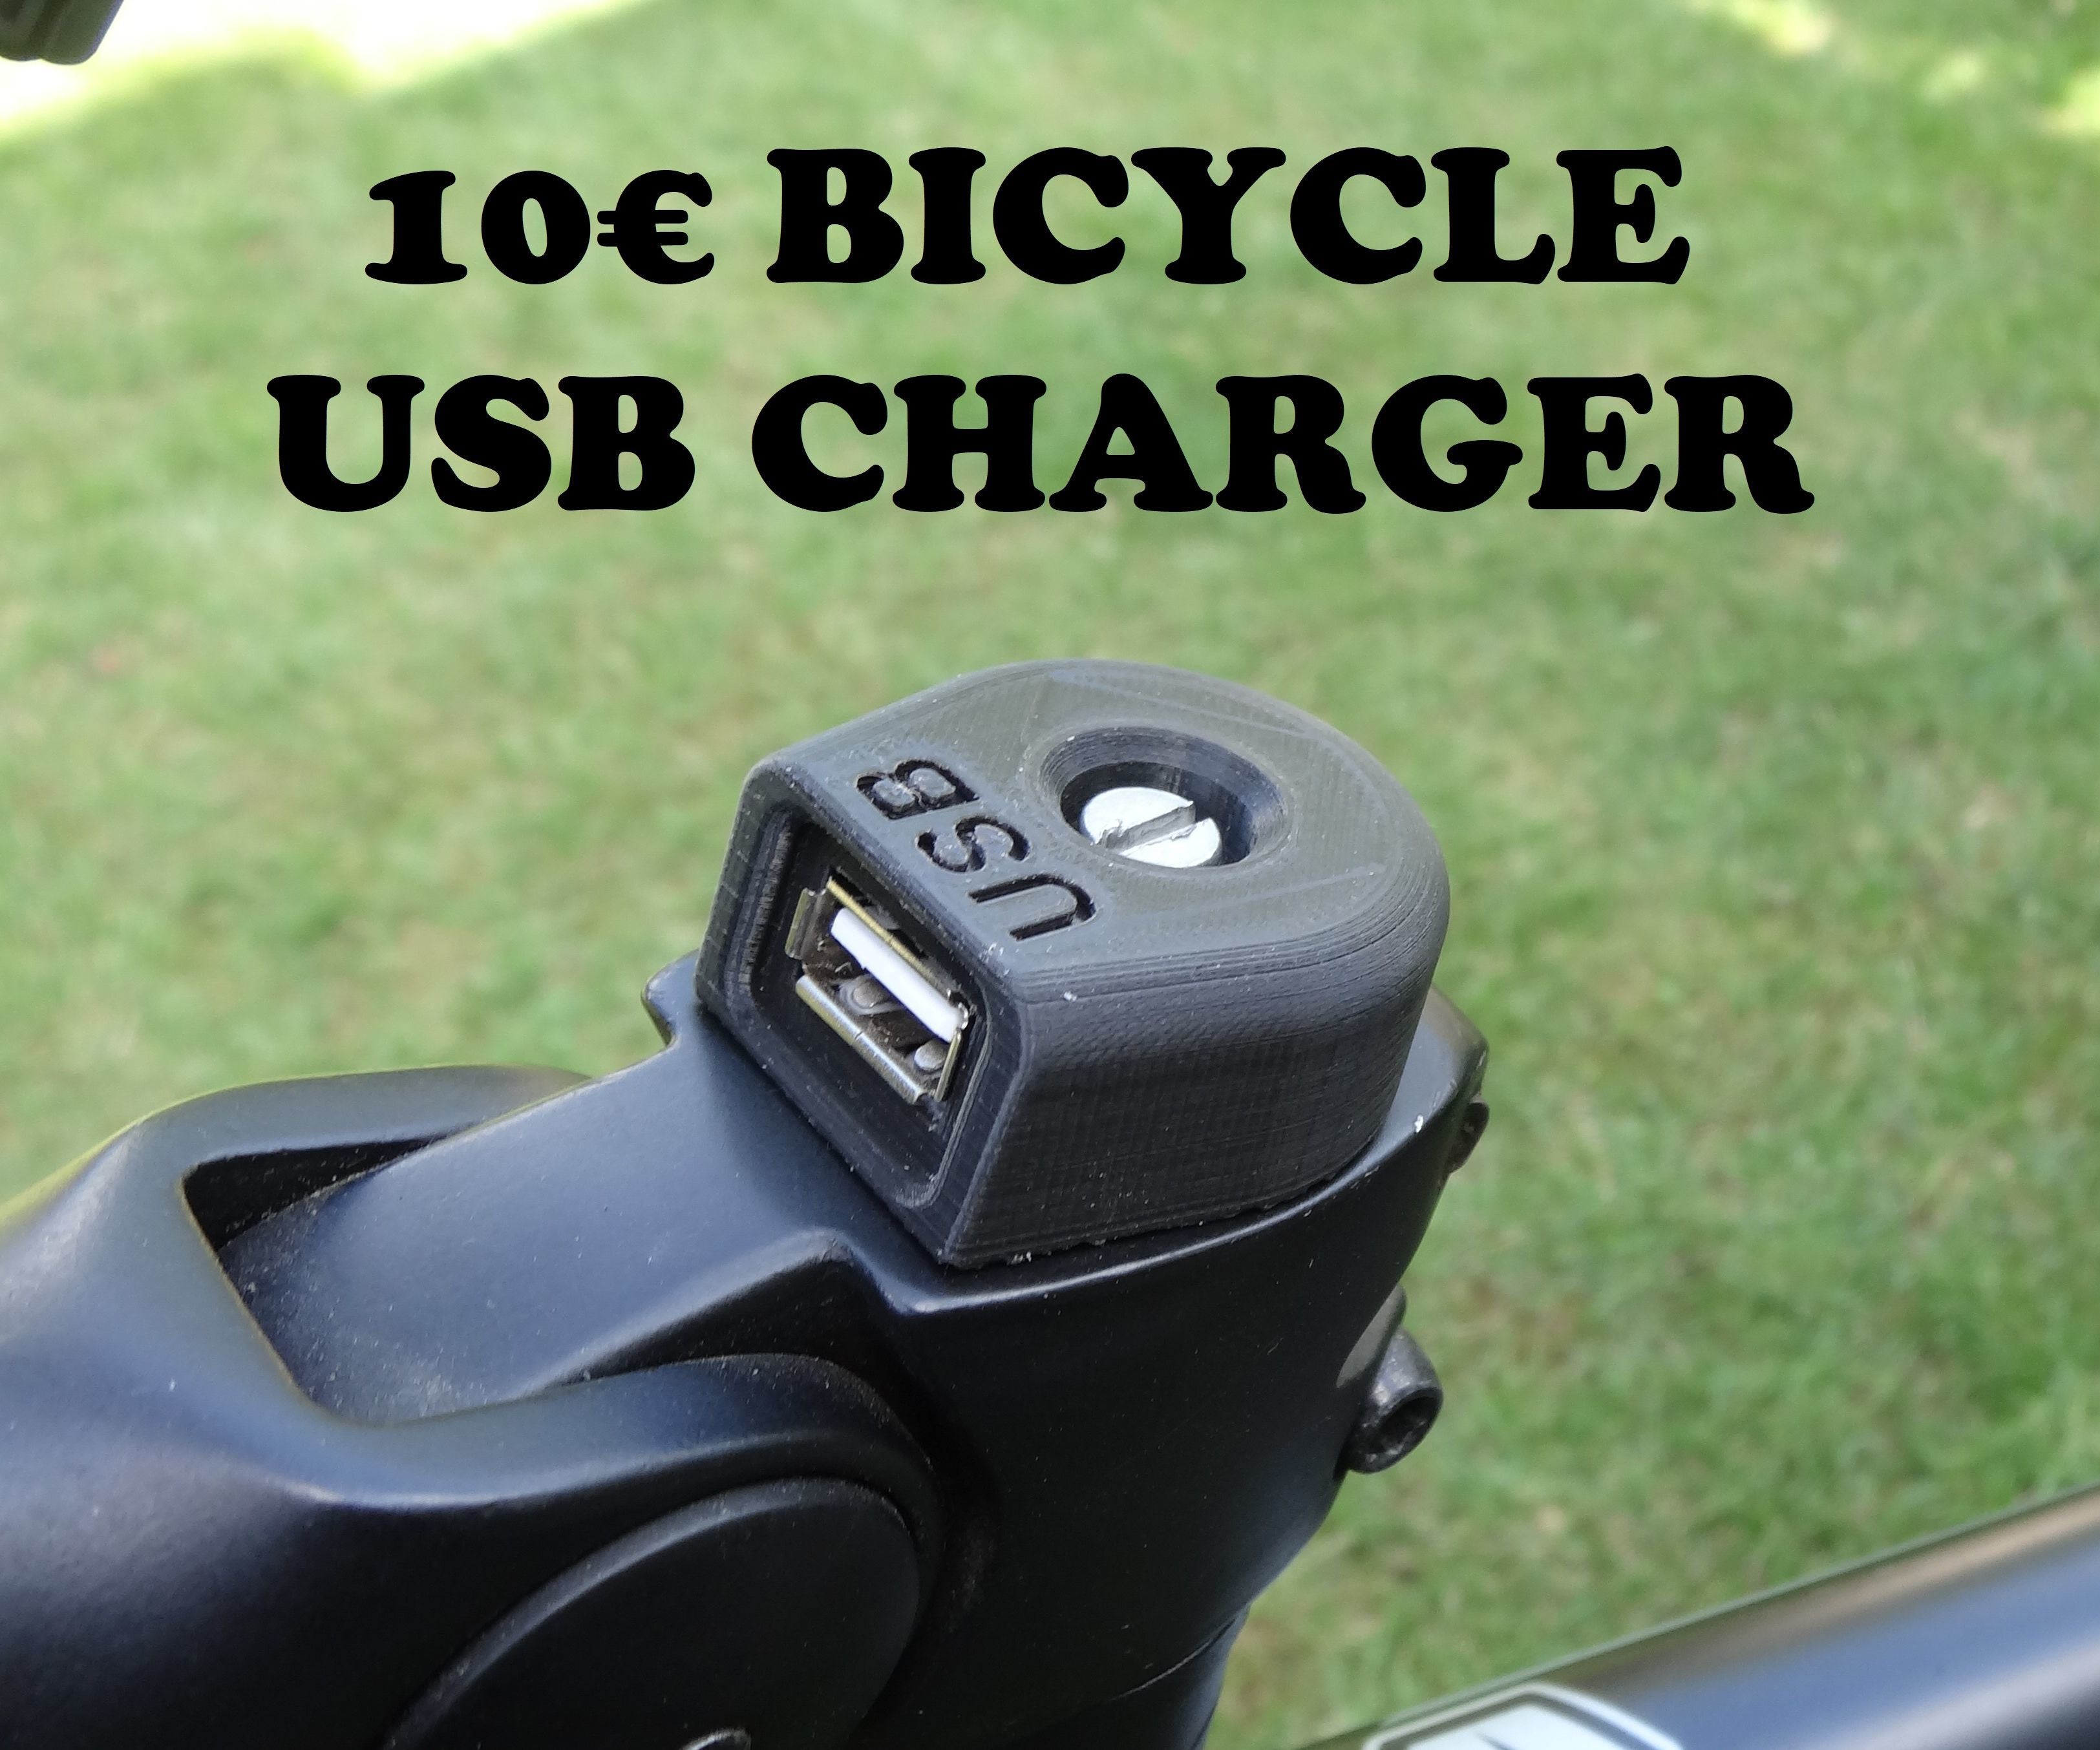 10€ BICYCLE USB CHARGER